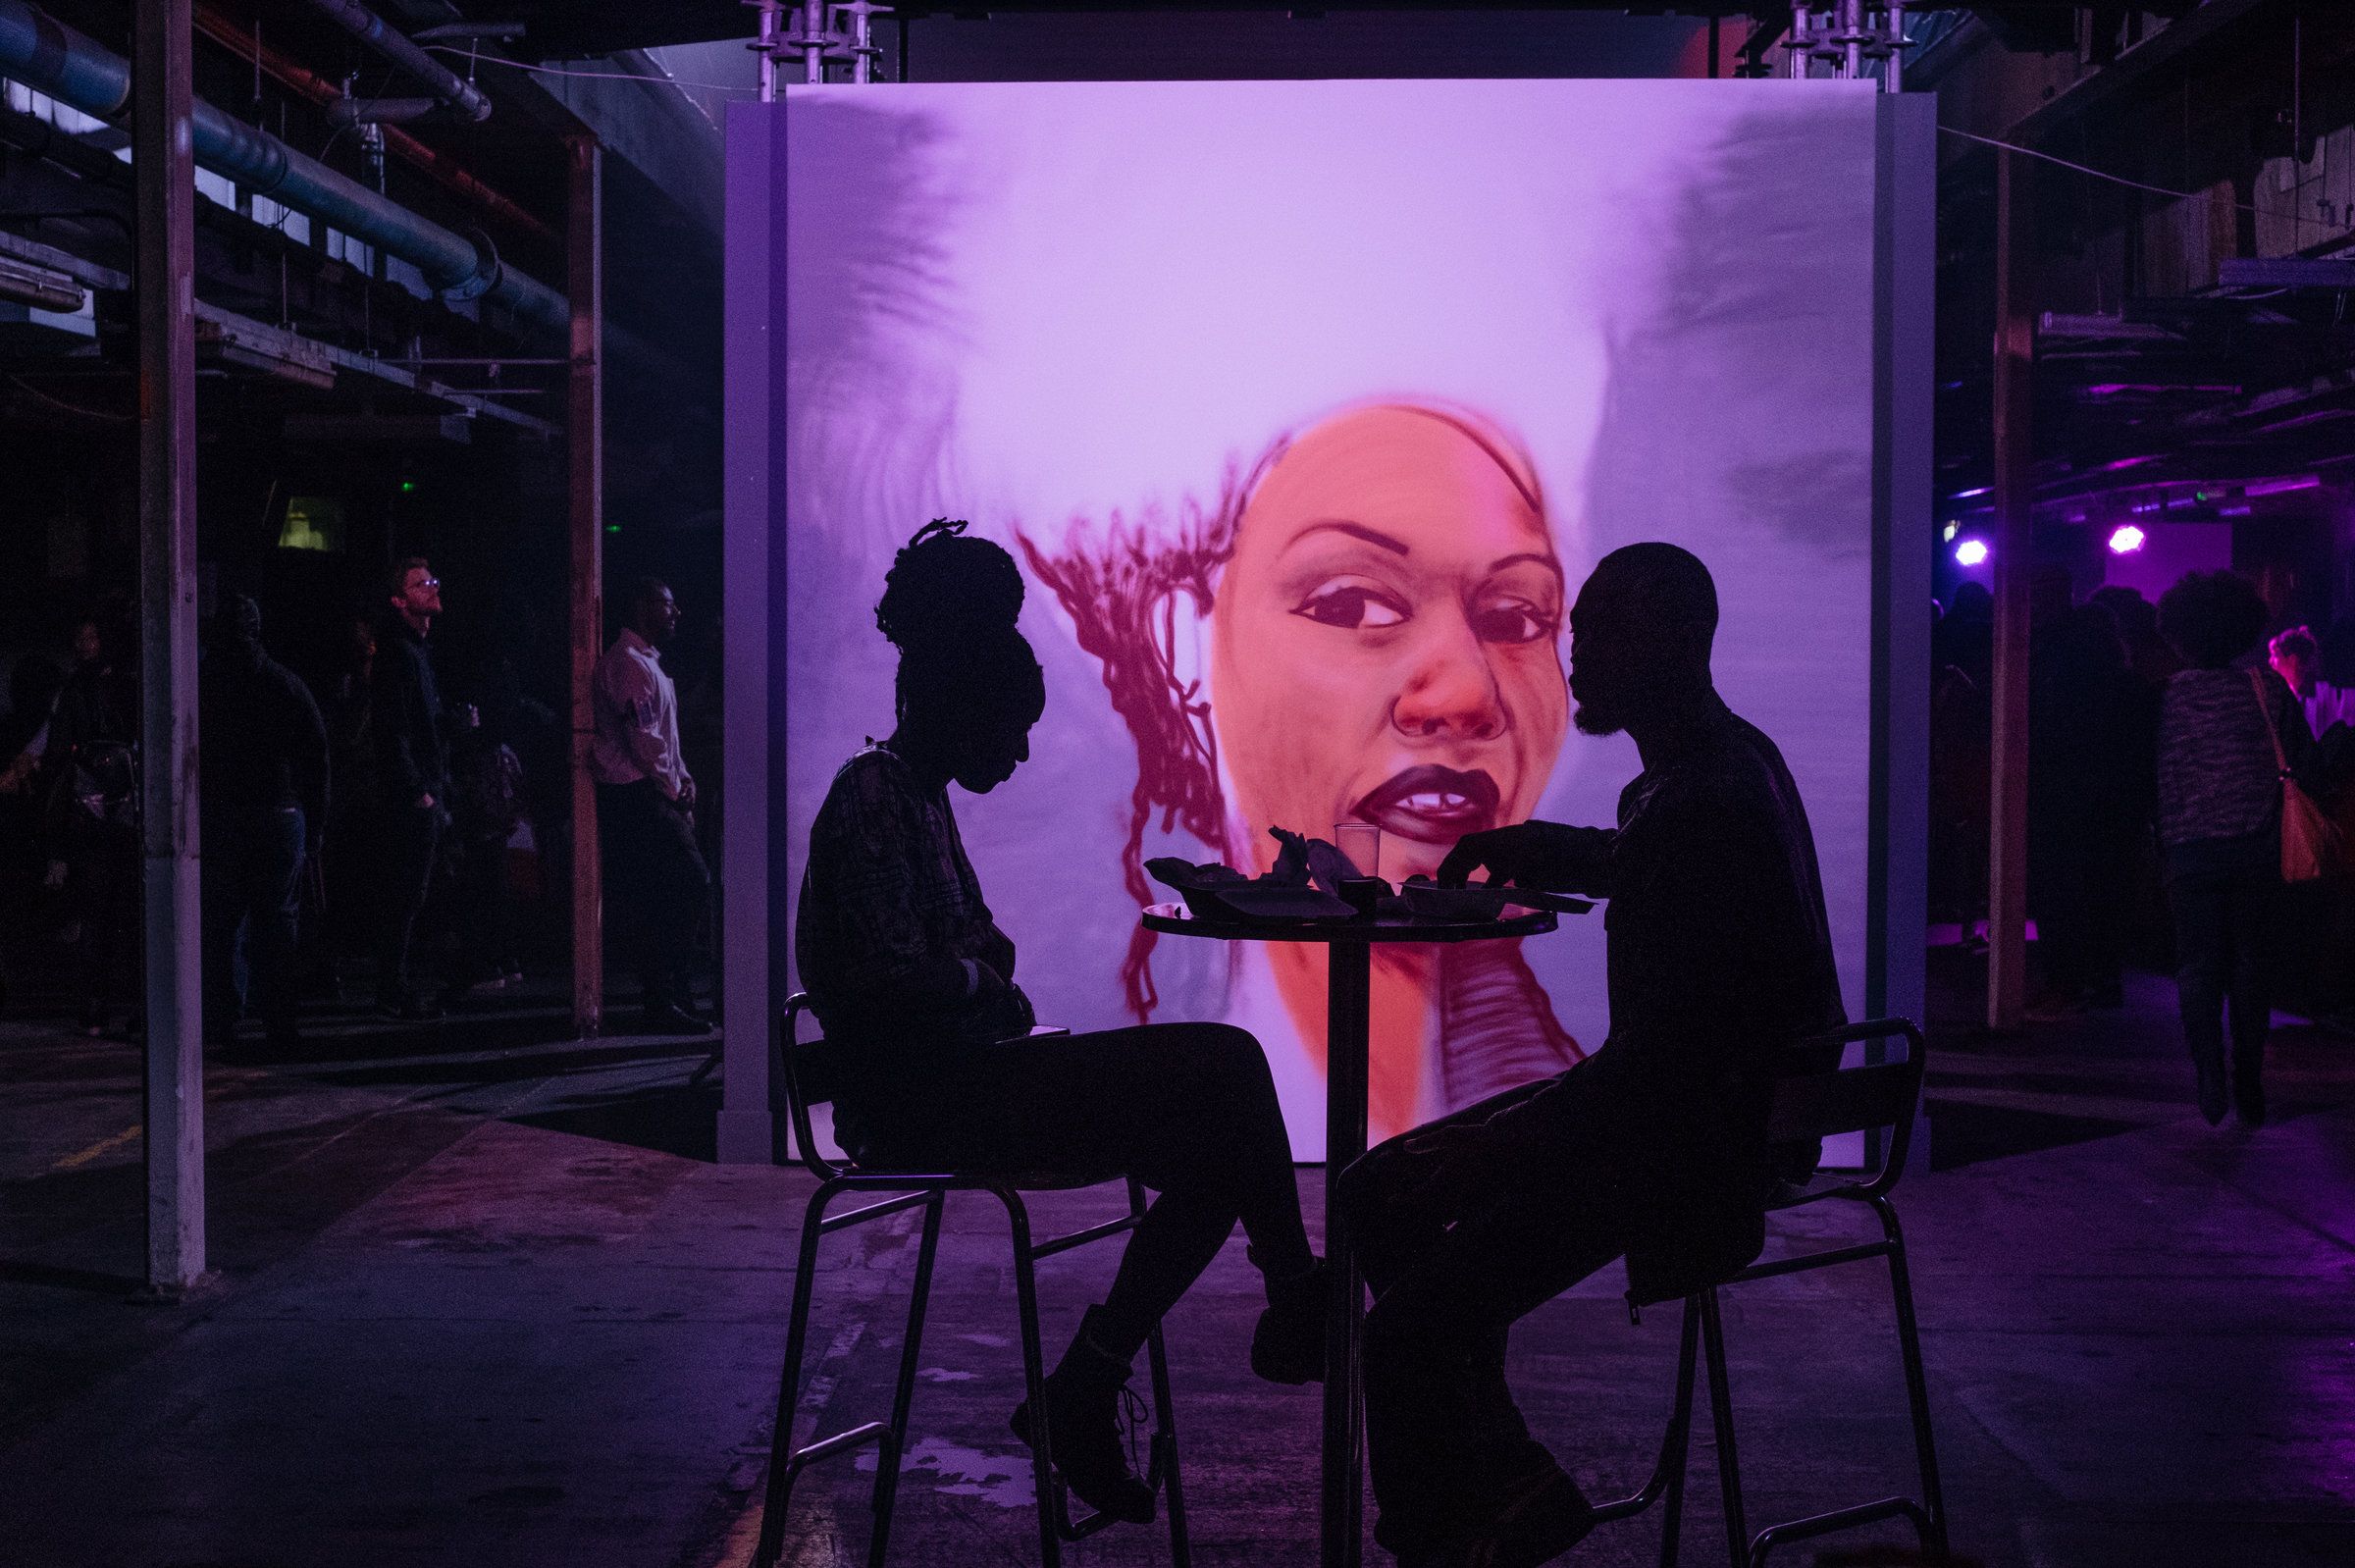 A mural illuminates an intimately lit lounge area at the Afropunk London festival in July. Image by Melissa Bunni Elian. South Africa, 2017.